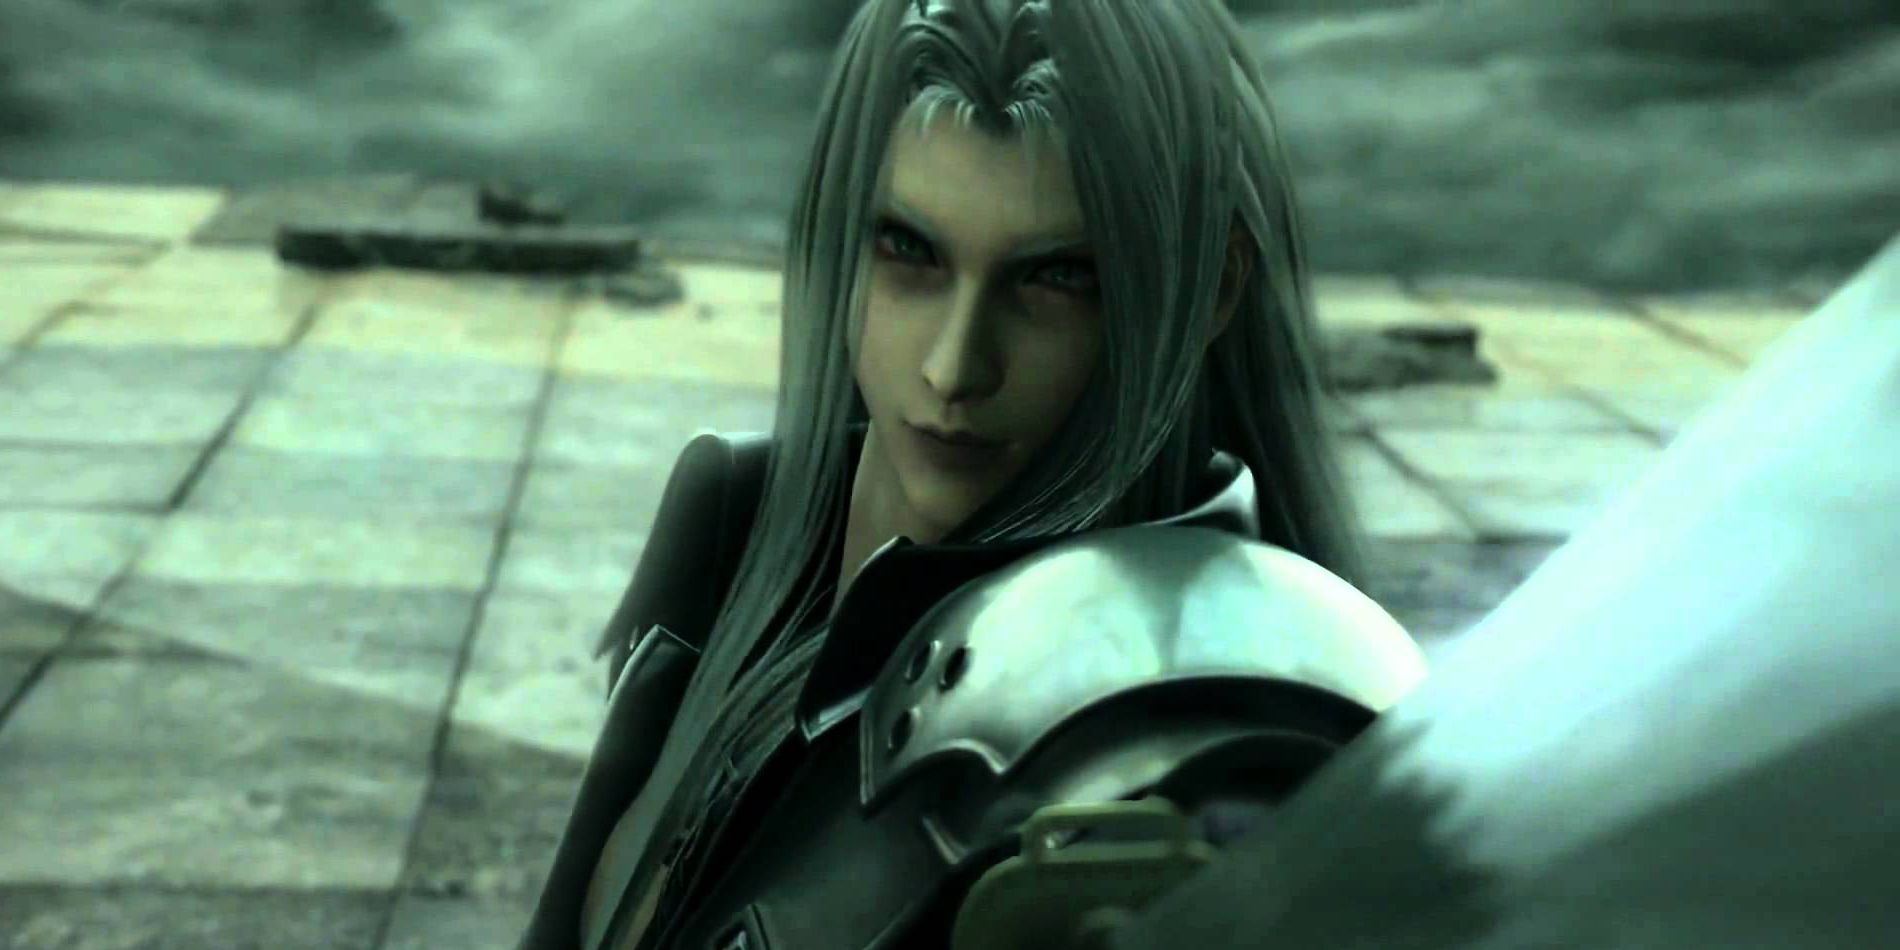 Sephiroth appears much earlier in FF7 Remake than he did in the original game.